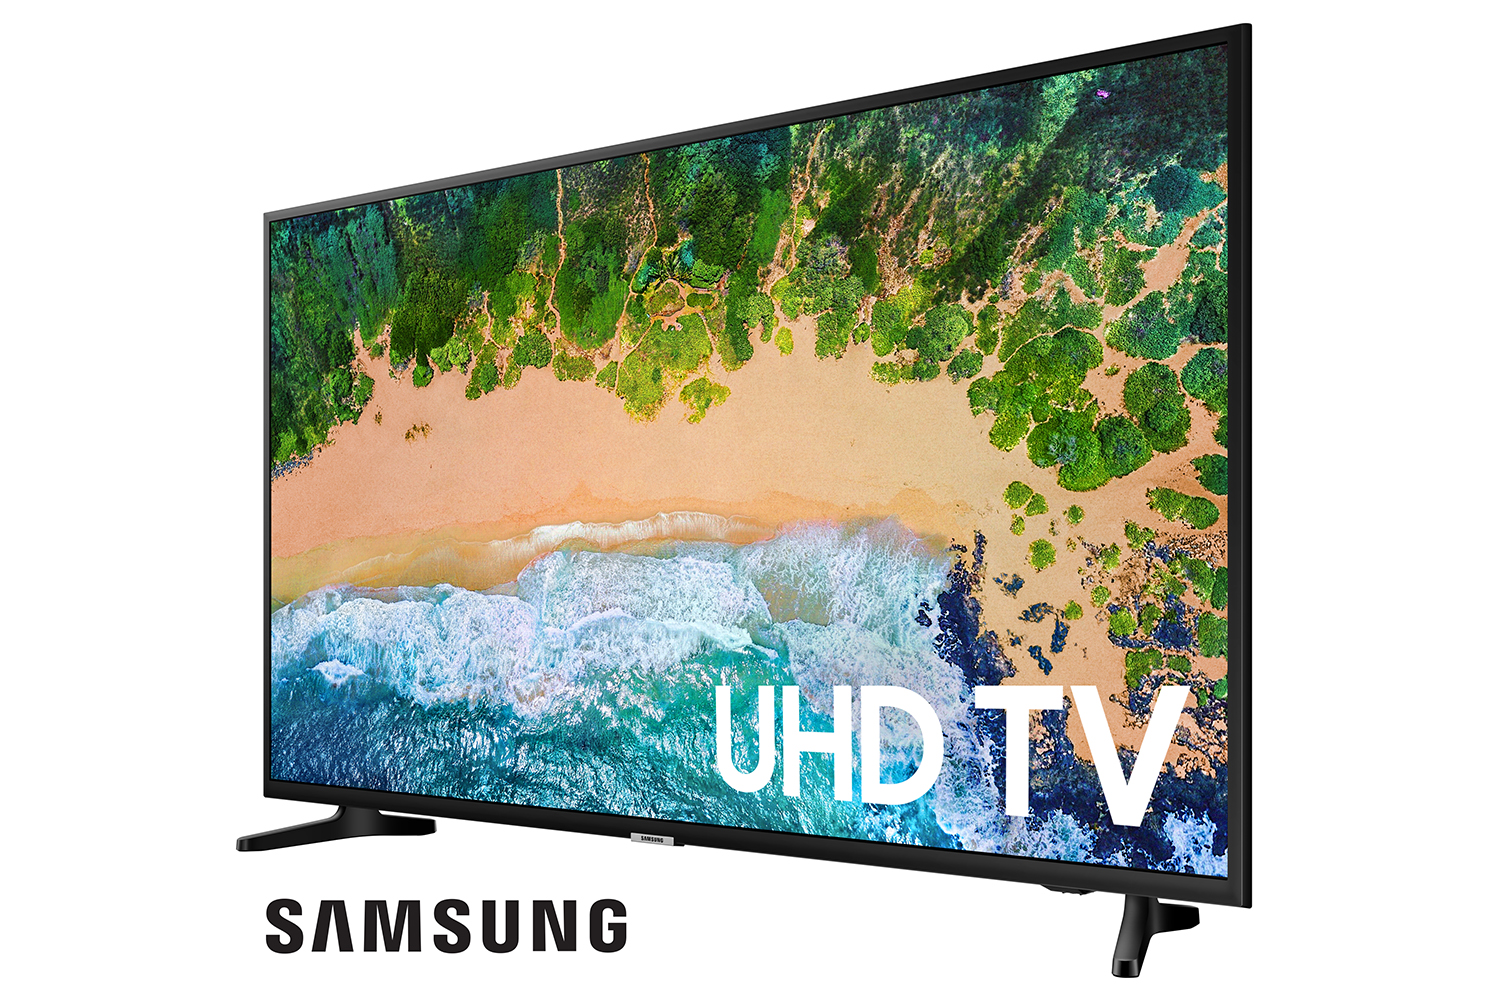 SAMSUNG 43" Class 4K UHD 2160p LED Smart TV with HDR UN43NU6900 - image 2 of 23